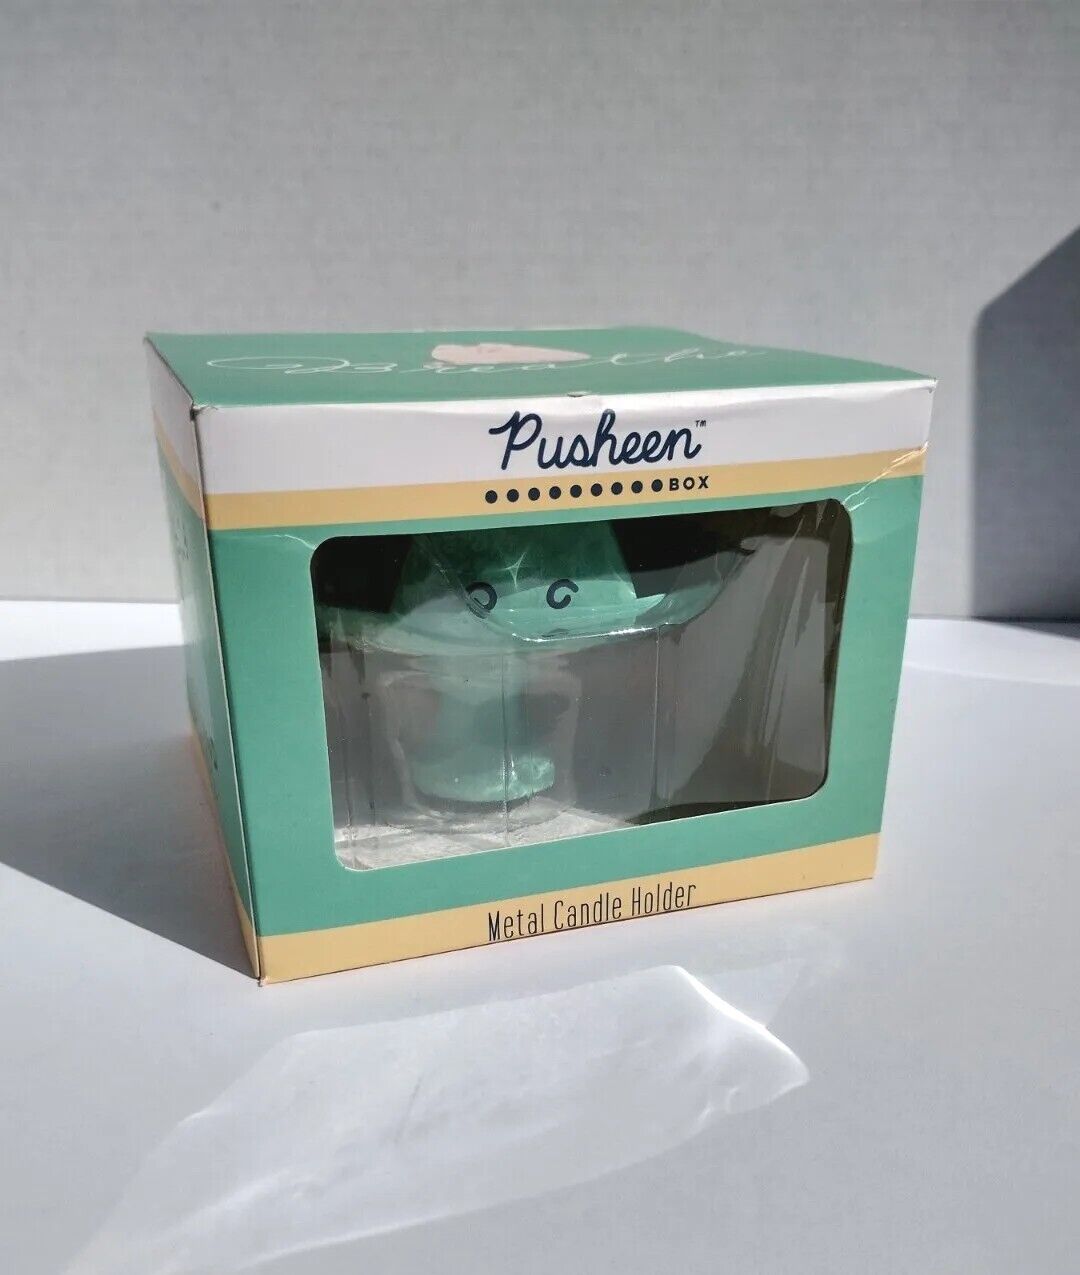 Pusheen Box Spring 2021 Metal Green Candle Holder Home Decor Culturefly Cat